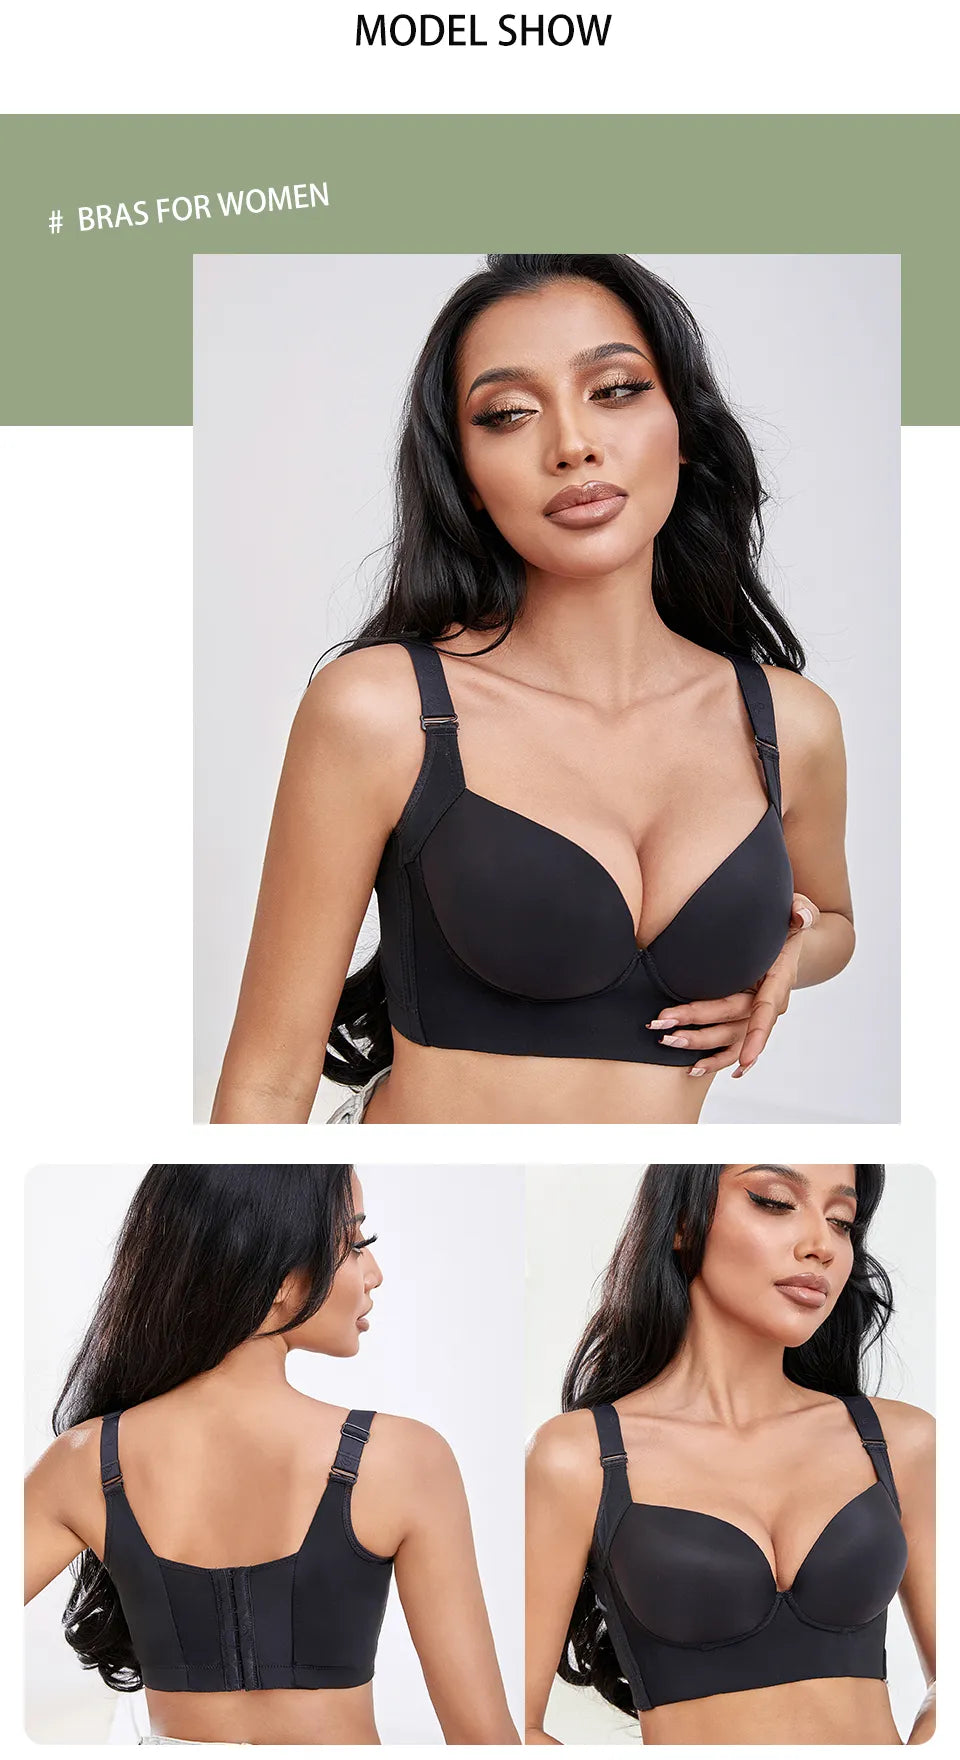 Shapely Deep Cup Full Back Coverage Push Up Bra